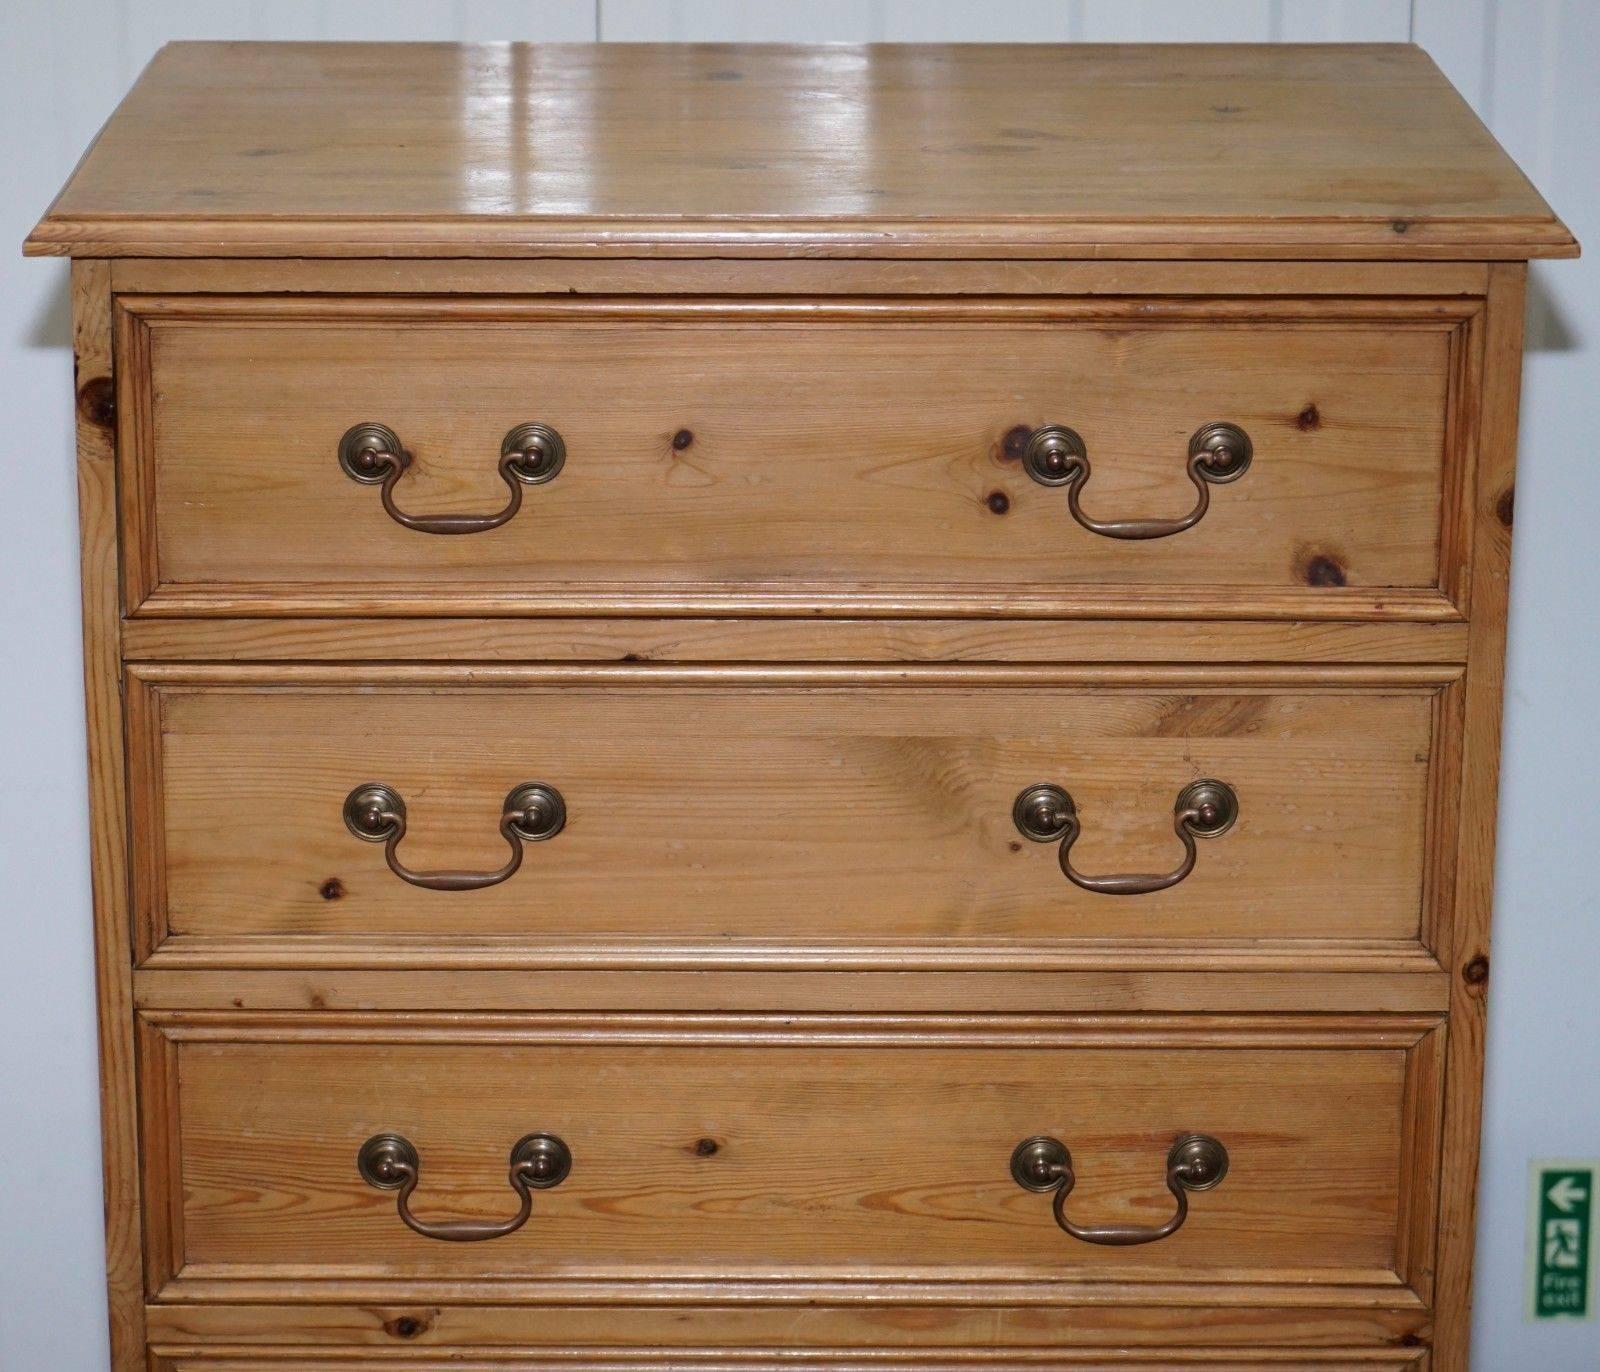 British Vintage Farmhouse Country Large Deep Tallboy Chest of Drawers Swan Neck Handles